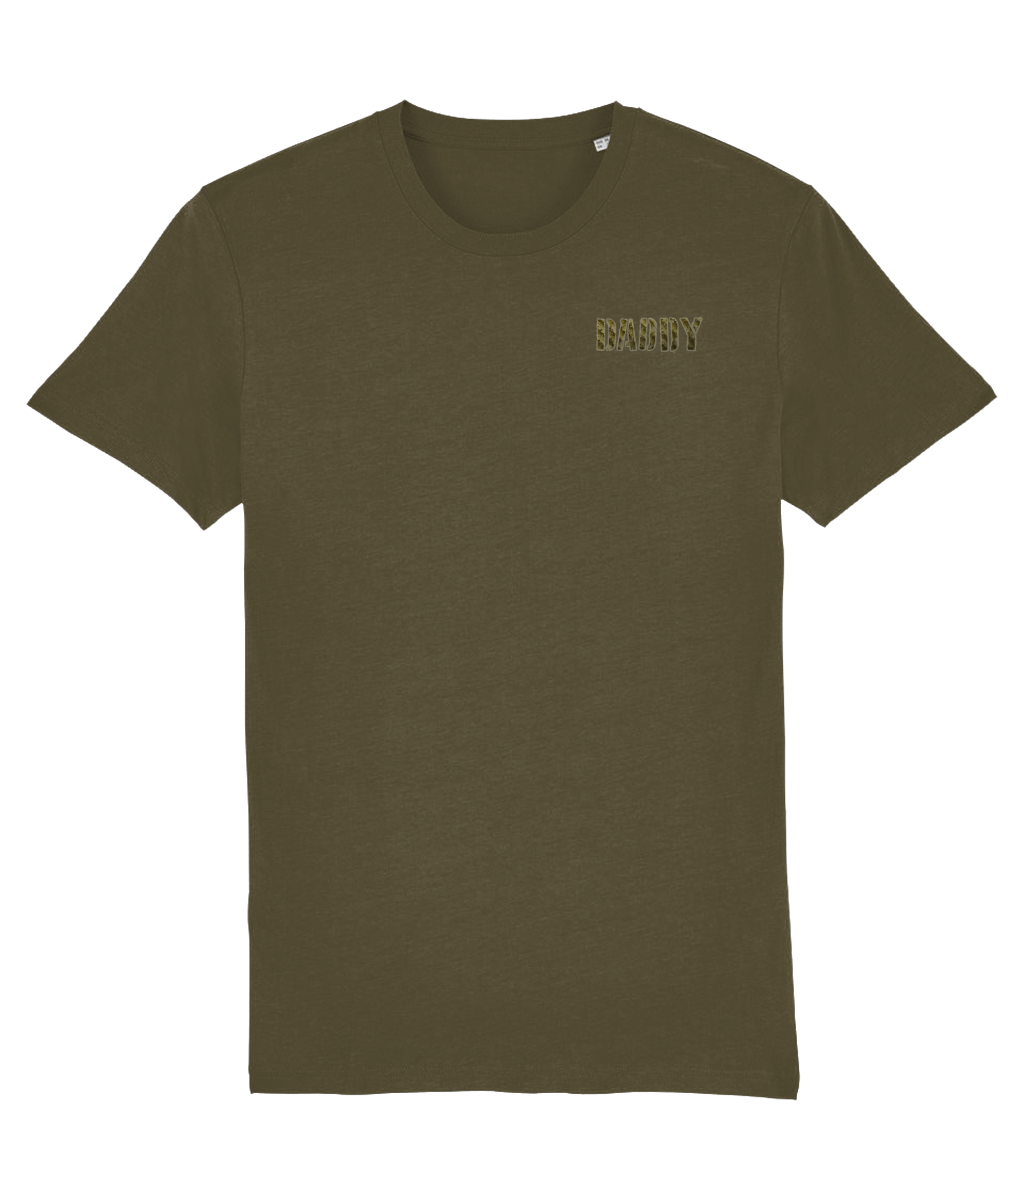 Daddy Embroidered Organic Cotton T-shirt